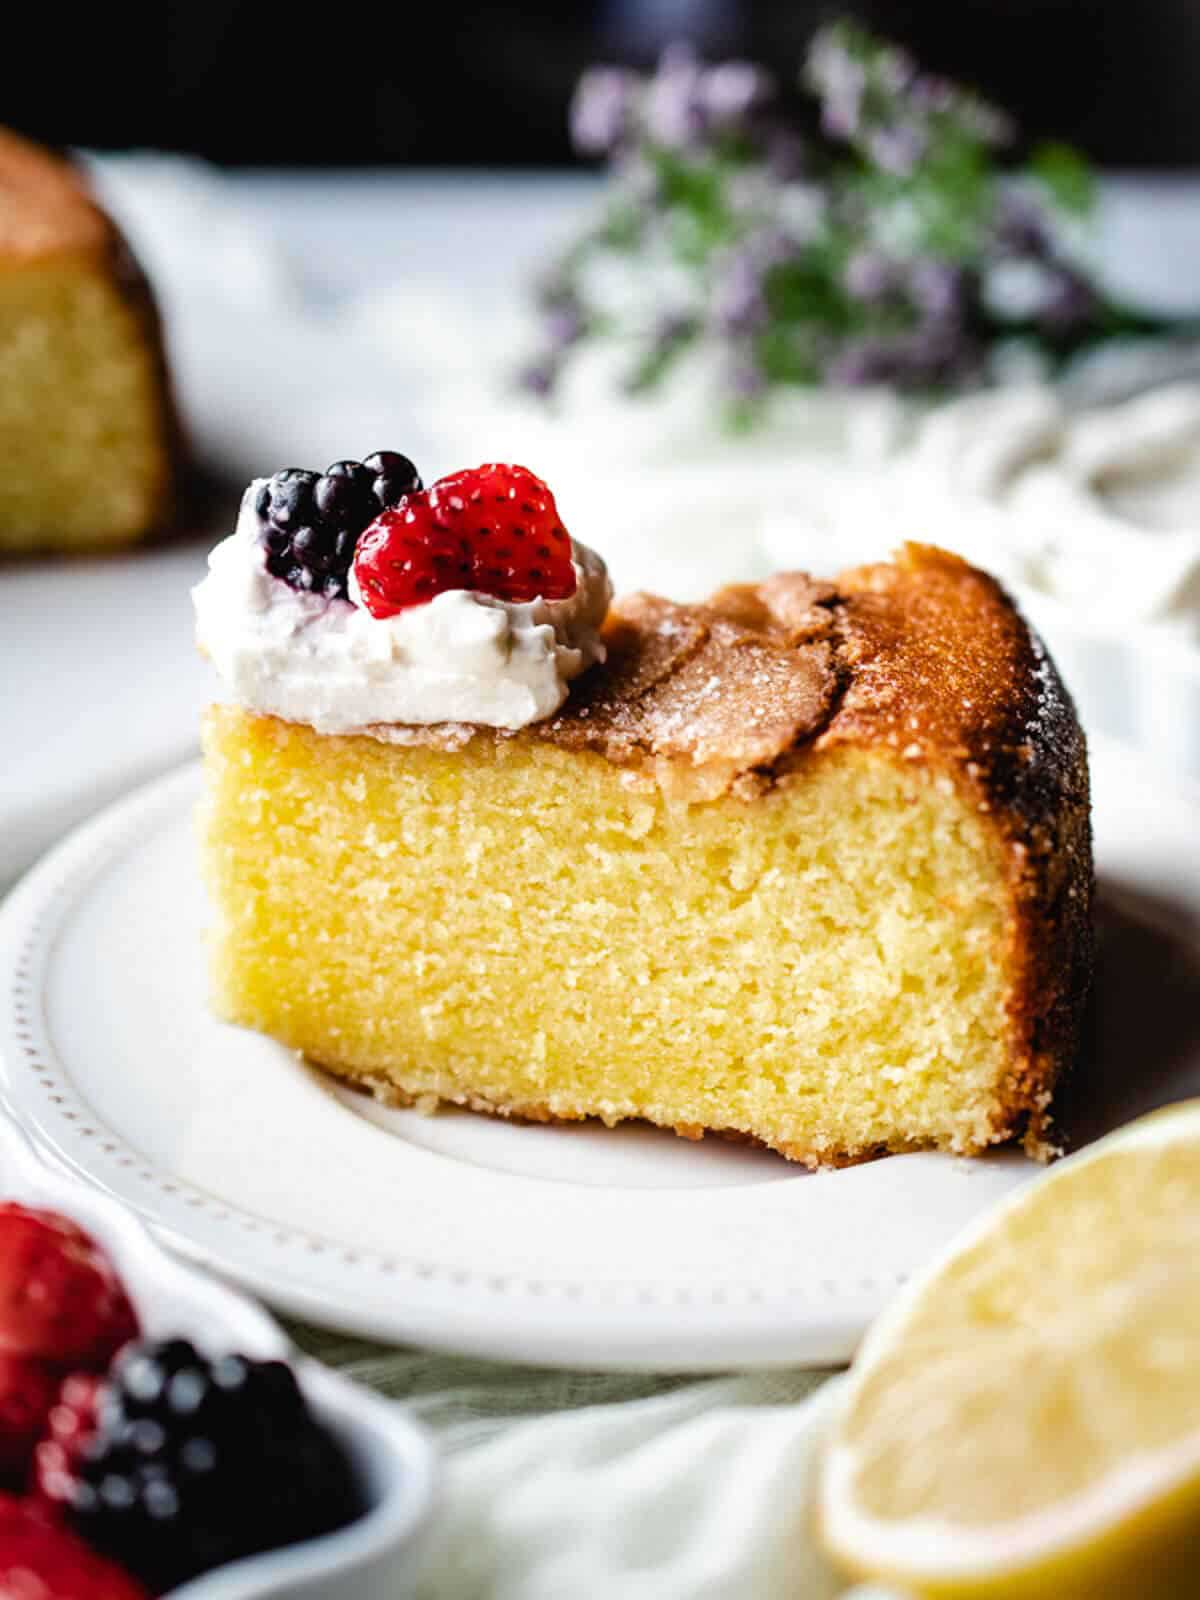 Slice of olive oil lemon cake on a plate with whipped cream and berries on top.